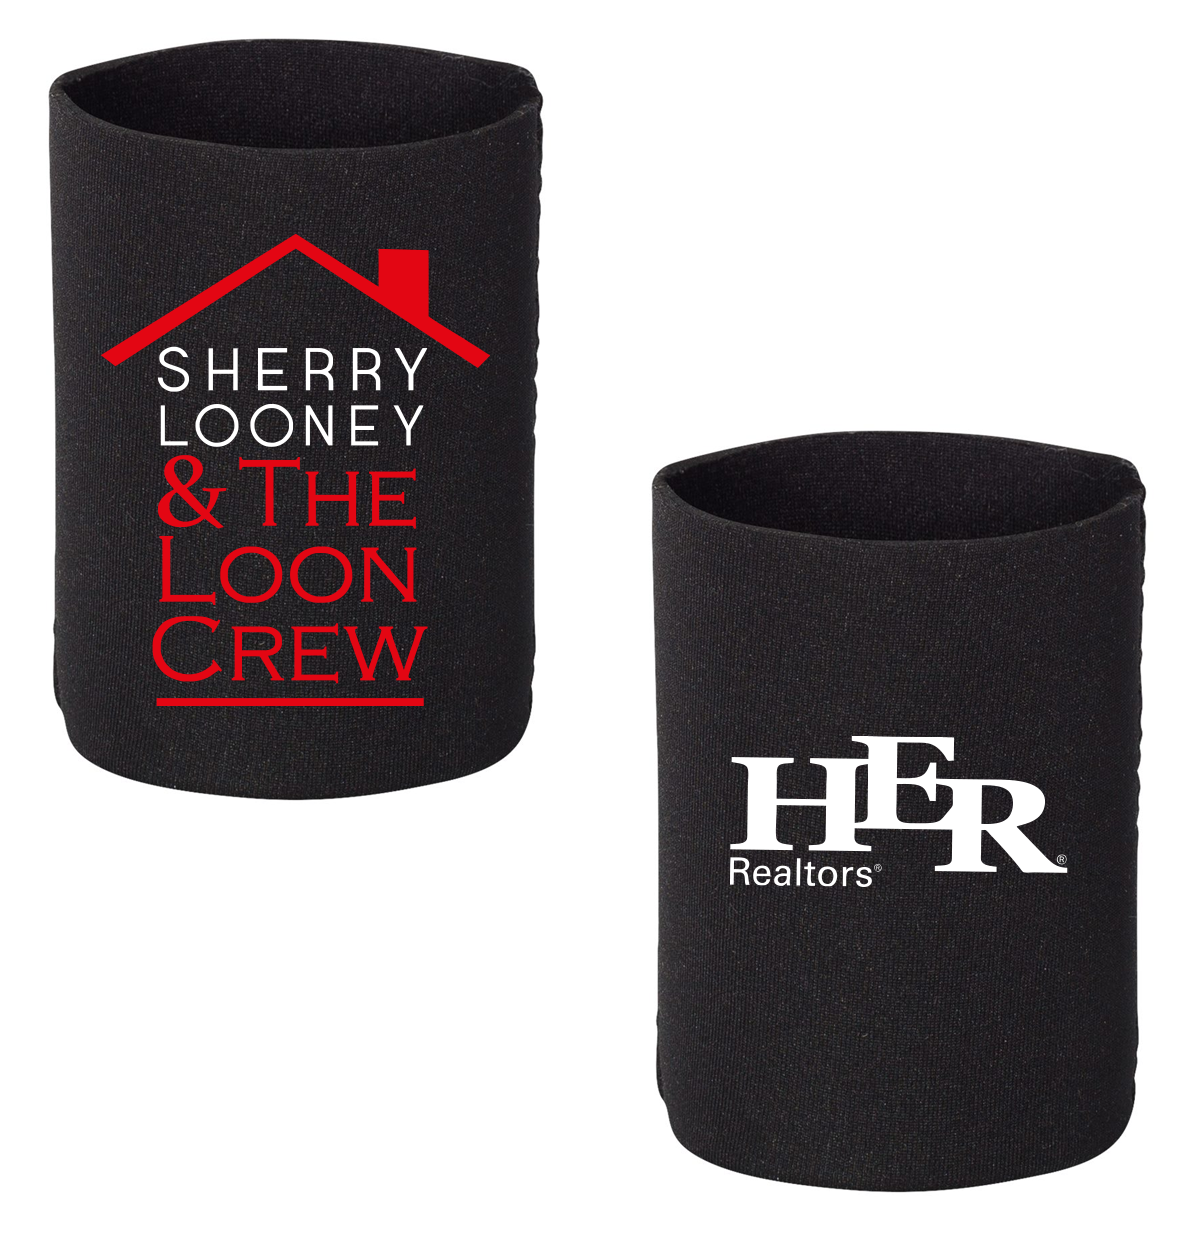 Can Coozie - Ask us for pricing on 25+